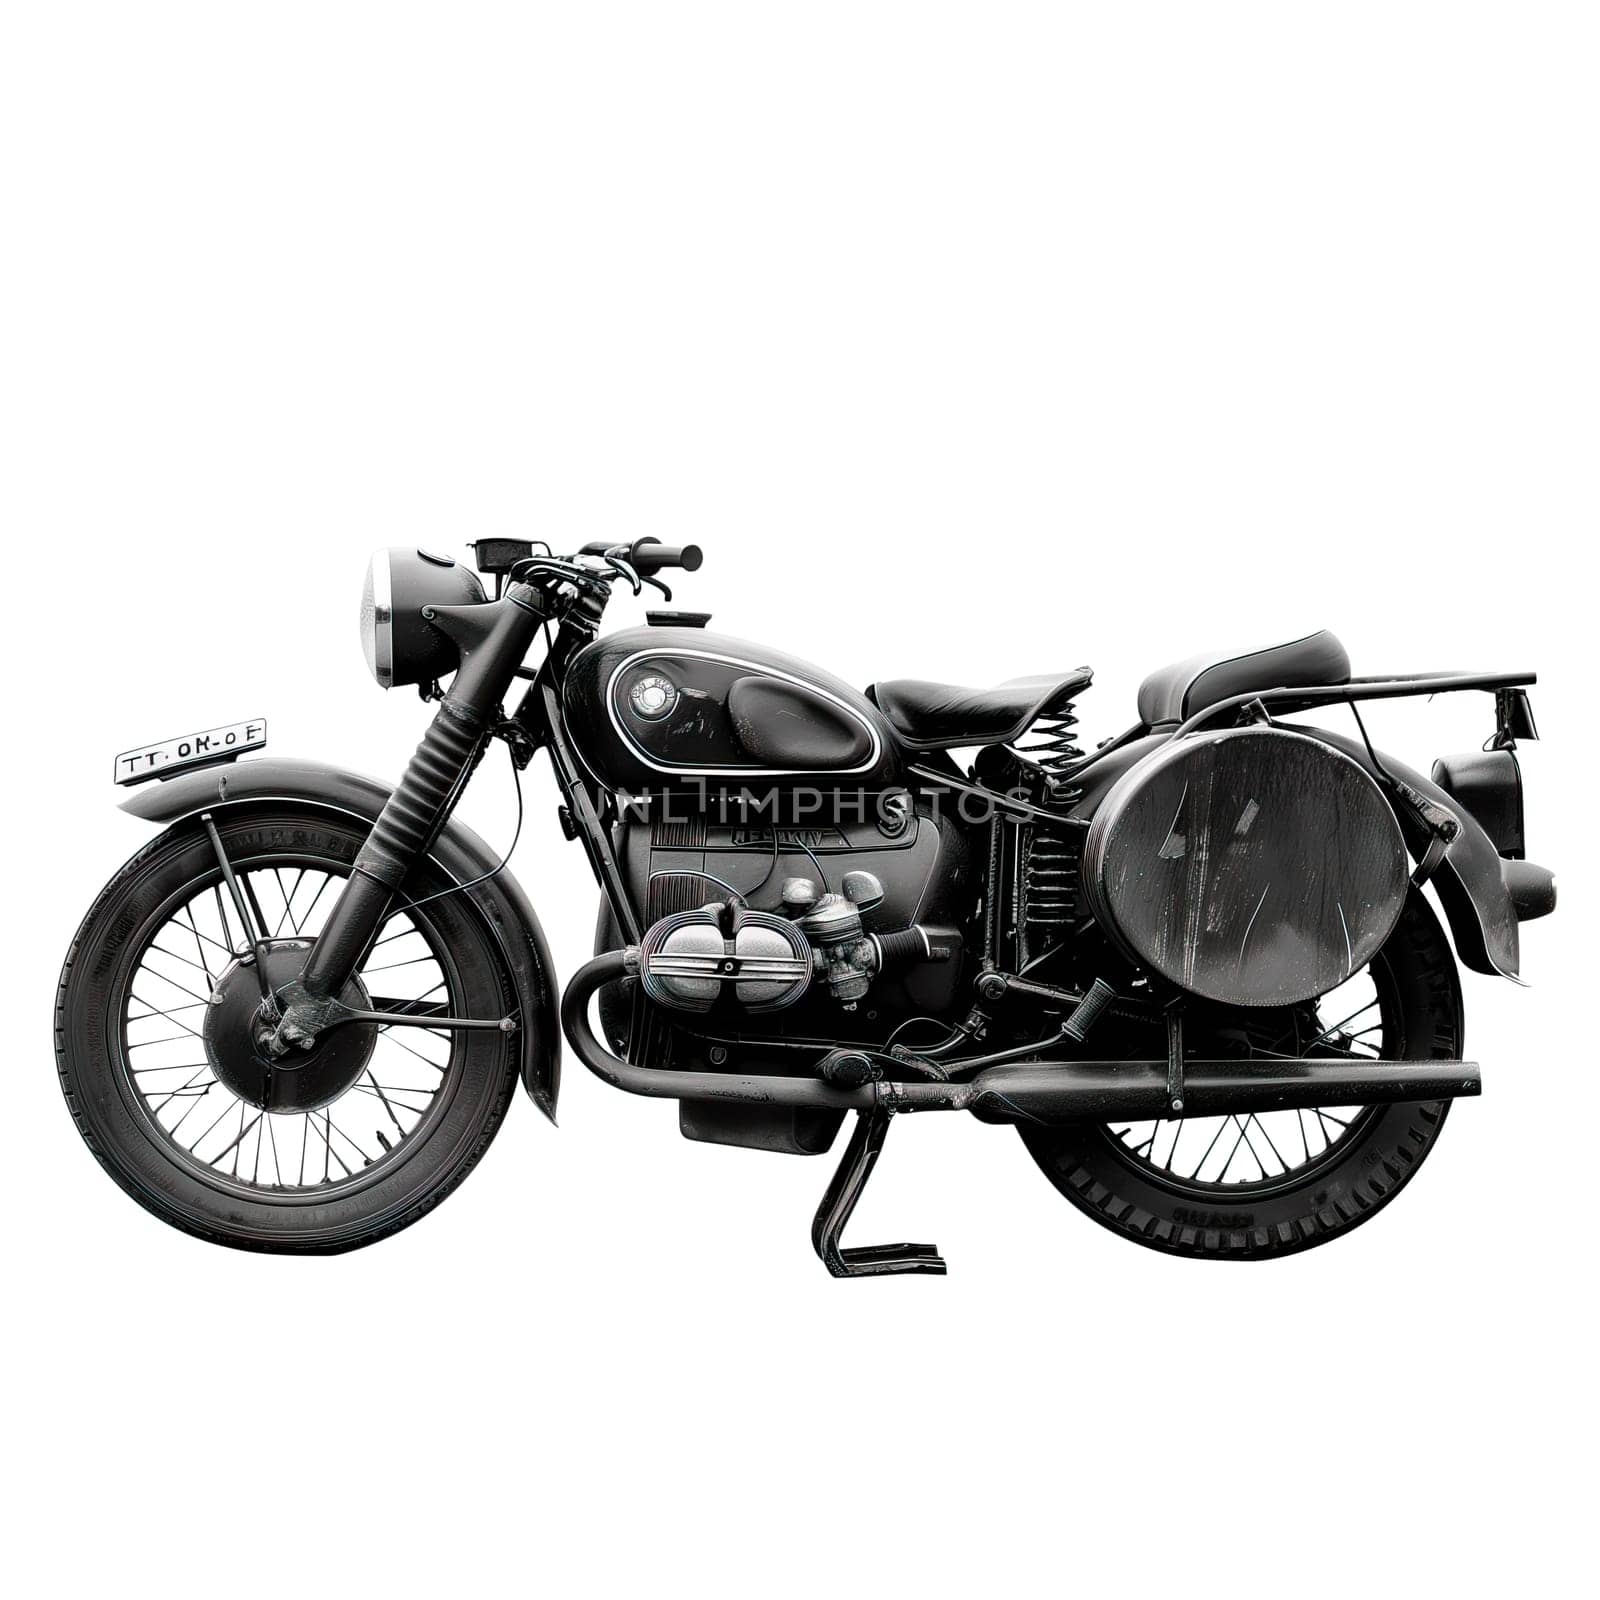 Vintage classic motorcycle isolated photo by Dustick